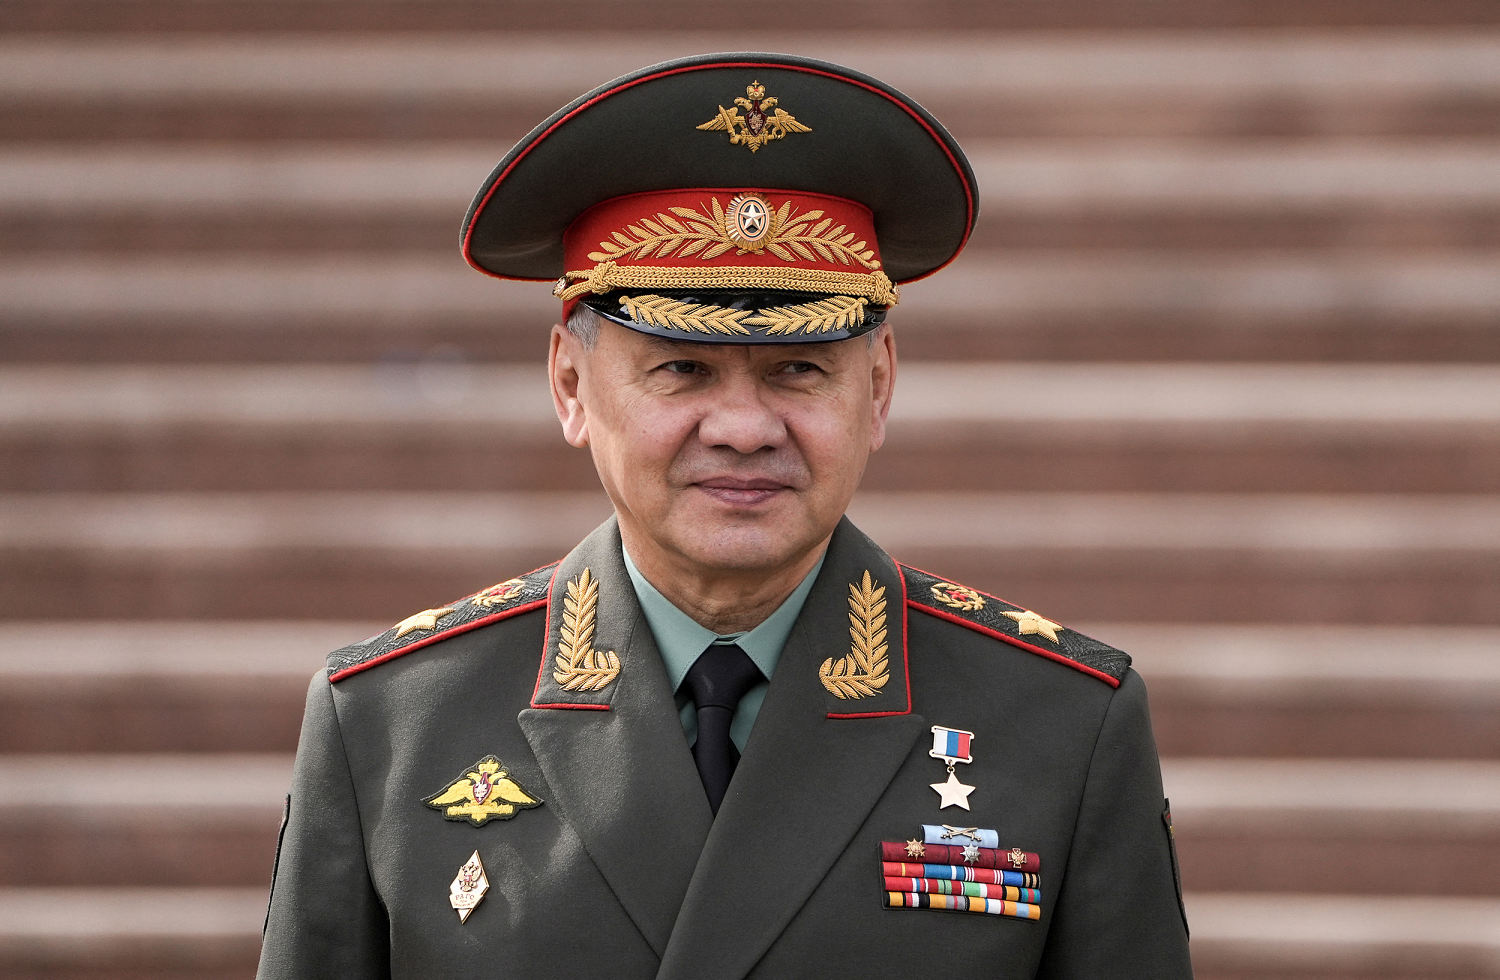 Putin sacks Sergei Shoigu as defense minister, appoints him as leader of security council